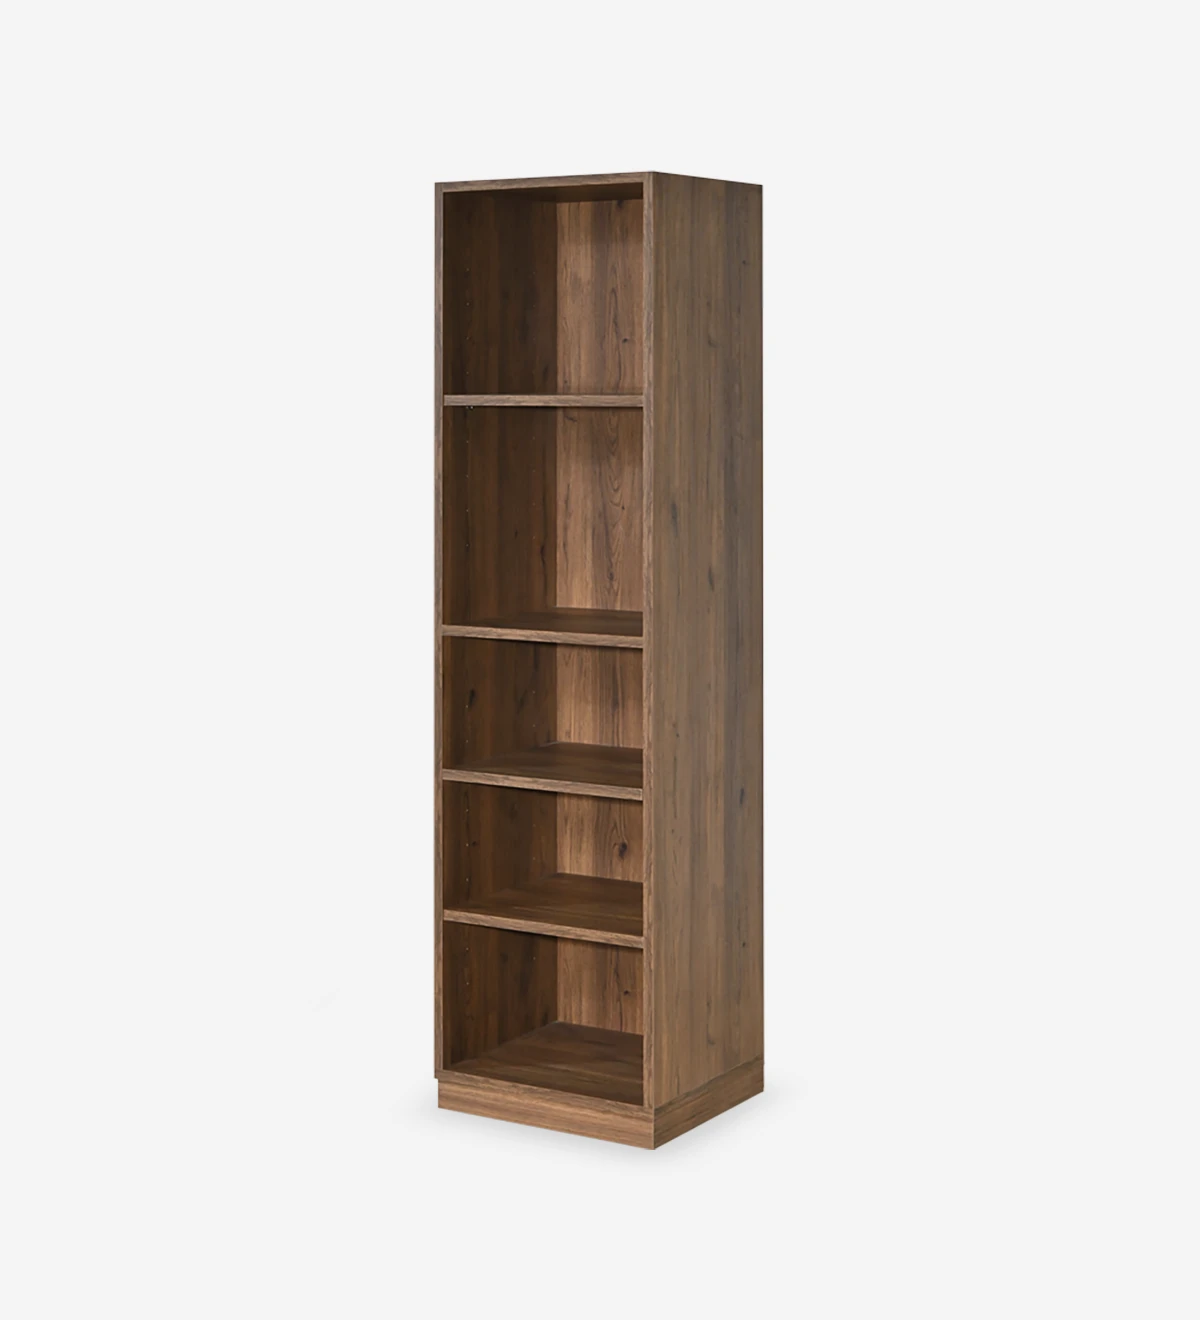 Low bookcase in aged oak, with removable shelves.